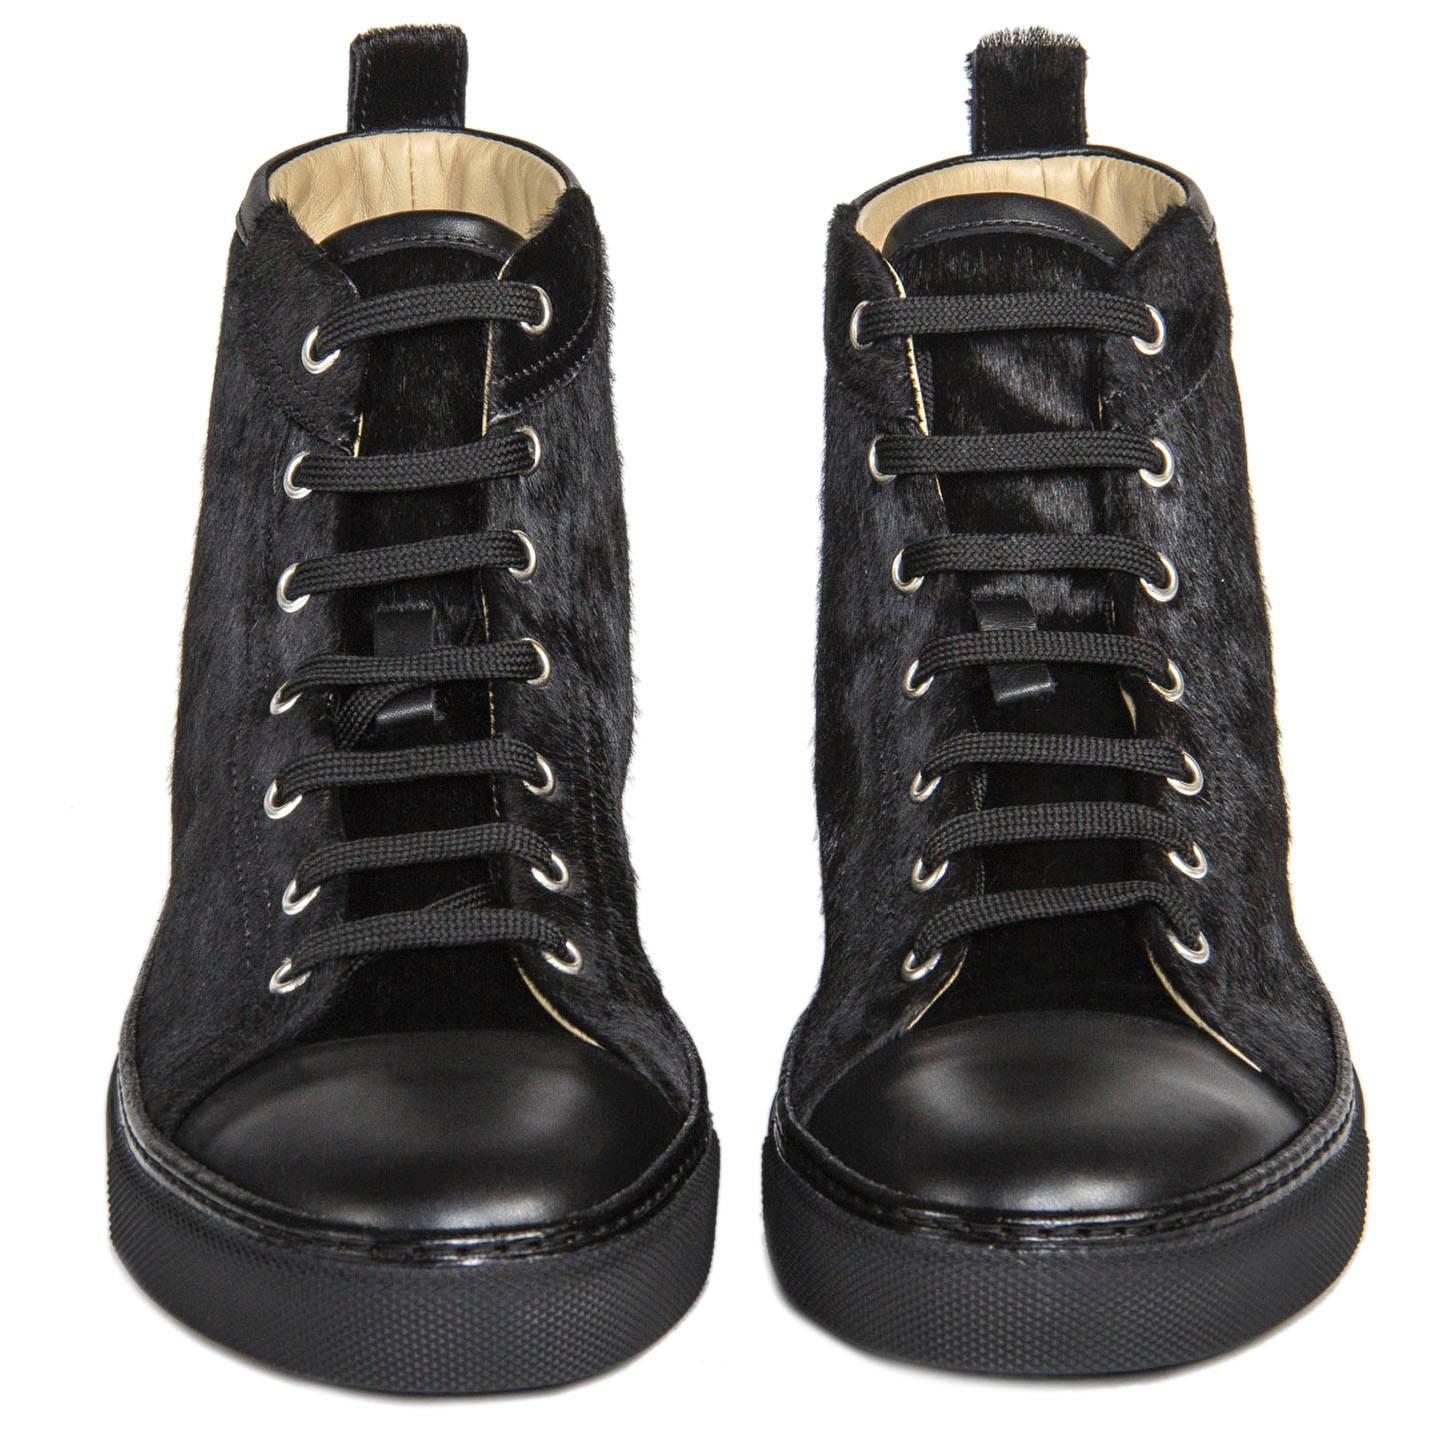 Jimmy pony sport femme noir high top sneakers with rubber sole and round logo on the outer side. Made in Italy.

Size  40 Italian sizing
Condition  Excellent: never worn